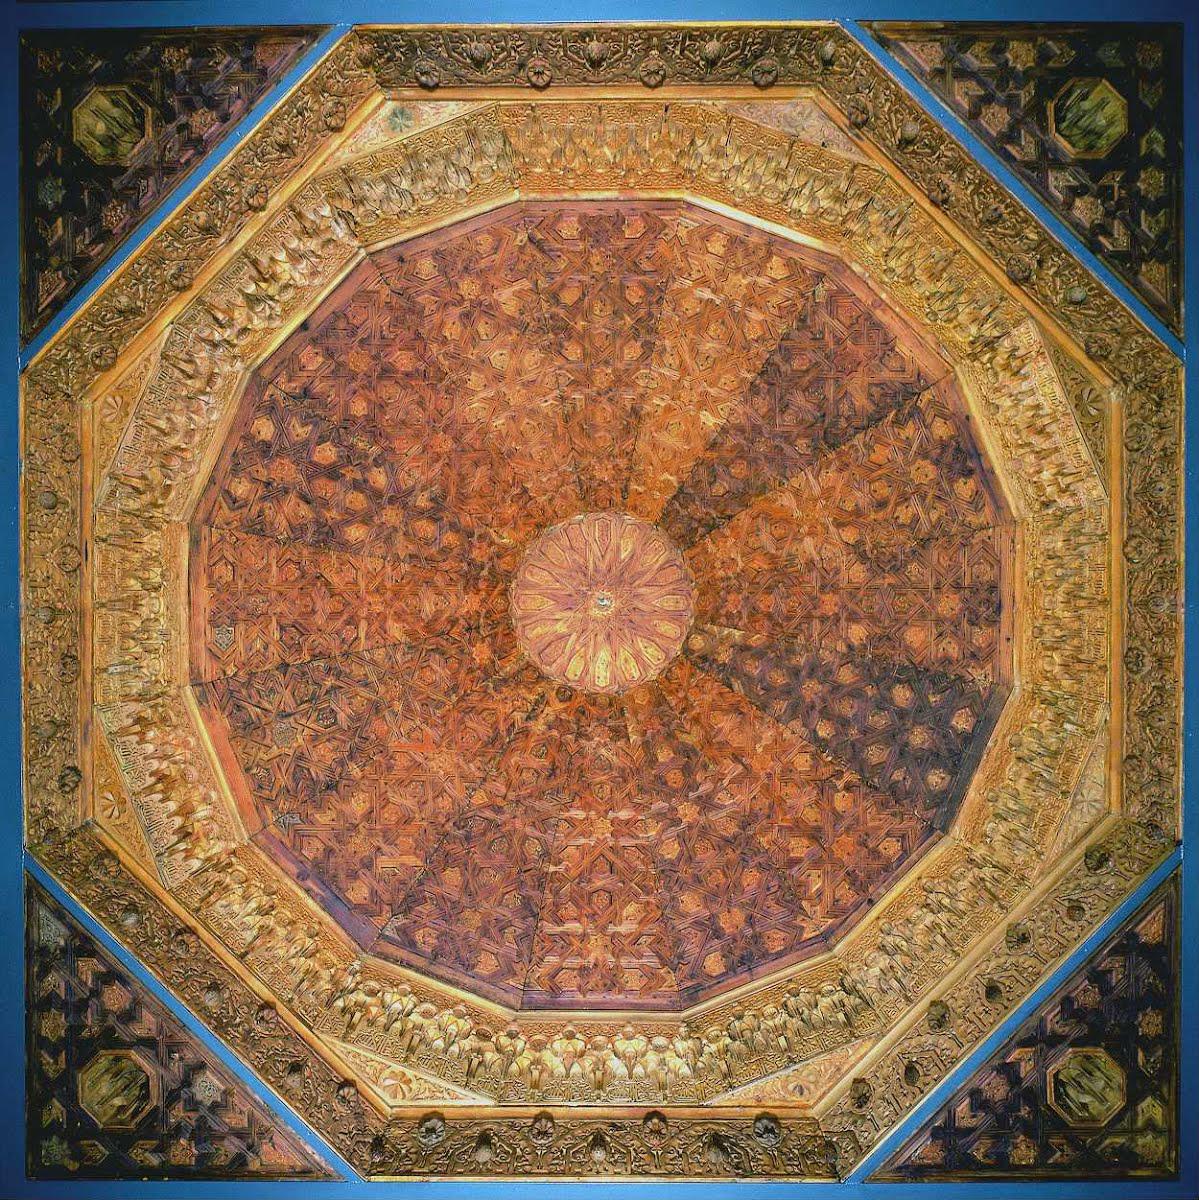 The cupola of the Torre de las Damas from the Alhambra palace, made of cedar and poplar wood. 1320 AD, Nasrid dynasty, now on display at the Museum of Islamic Art at the Pergamon Museum in Berlin